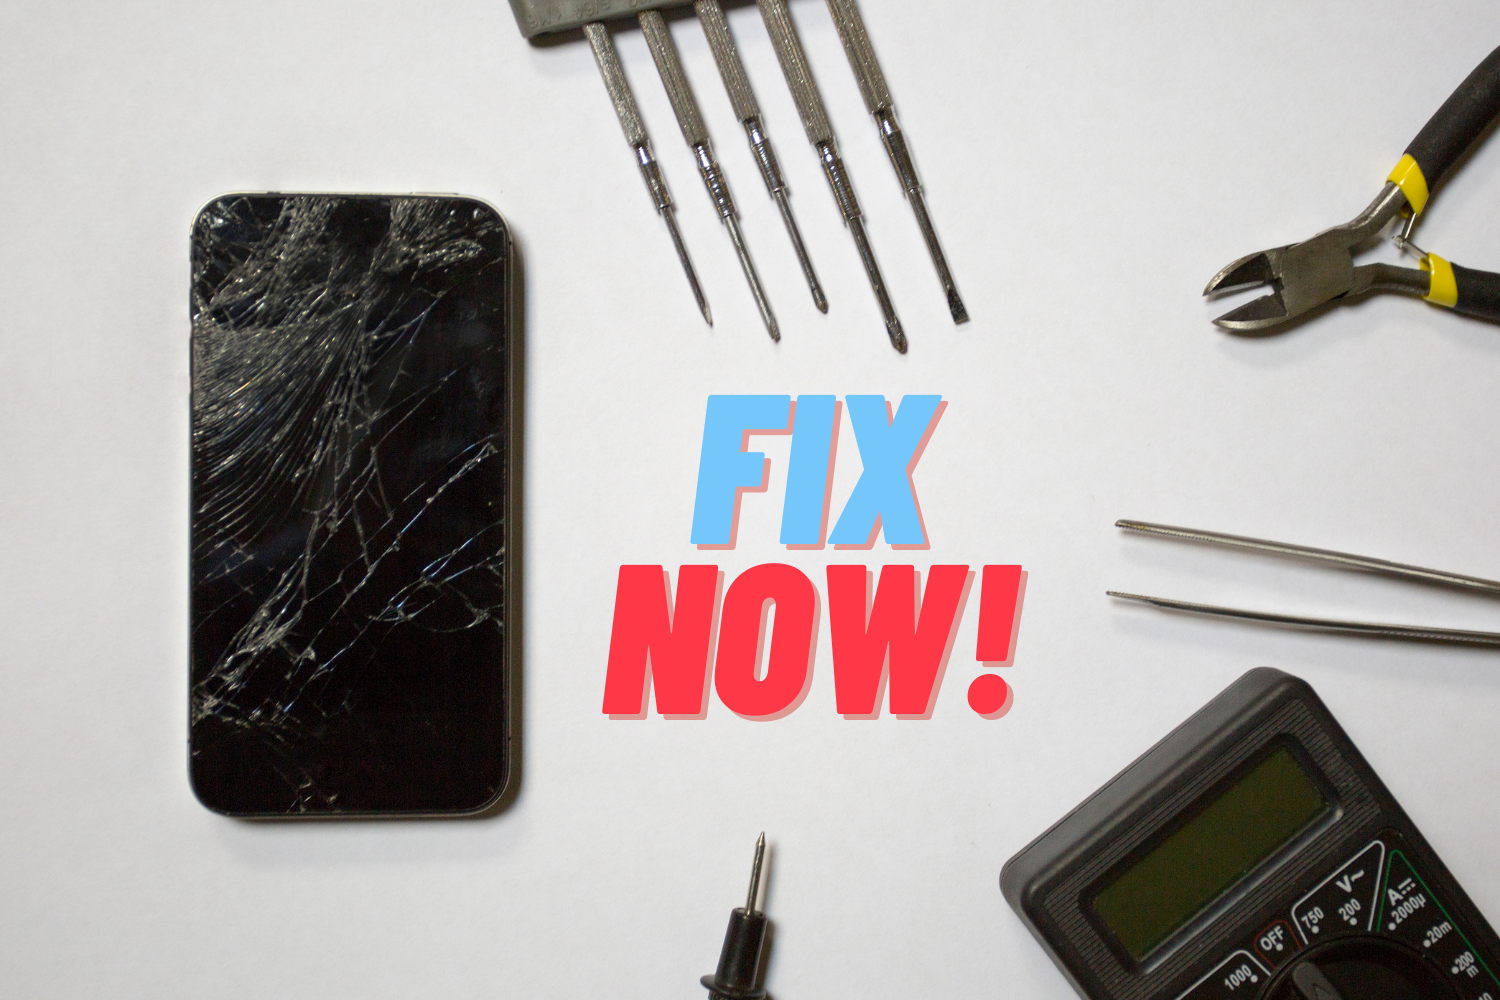 Cellfixt Phone Repair Houston. Our Certified Tech Fix all Major iPhone and Samsung Screen is less than 30 mintues. We fix all Kinds of Issue battery, Charging Port, Ear Speaker, Loud Speaker, iPhone Back Glass, Water Damage and Much More. Visit the store!